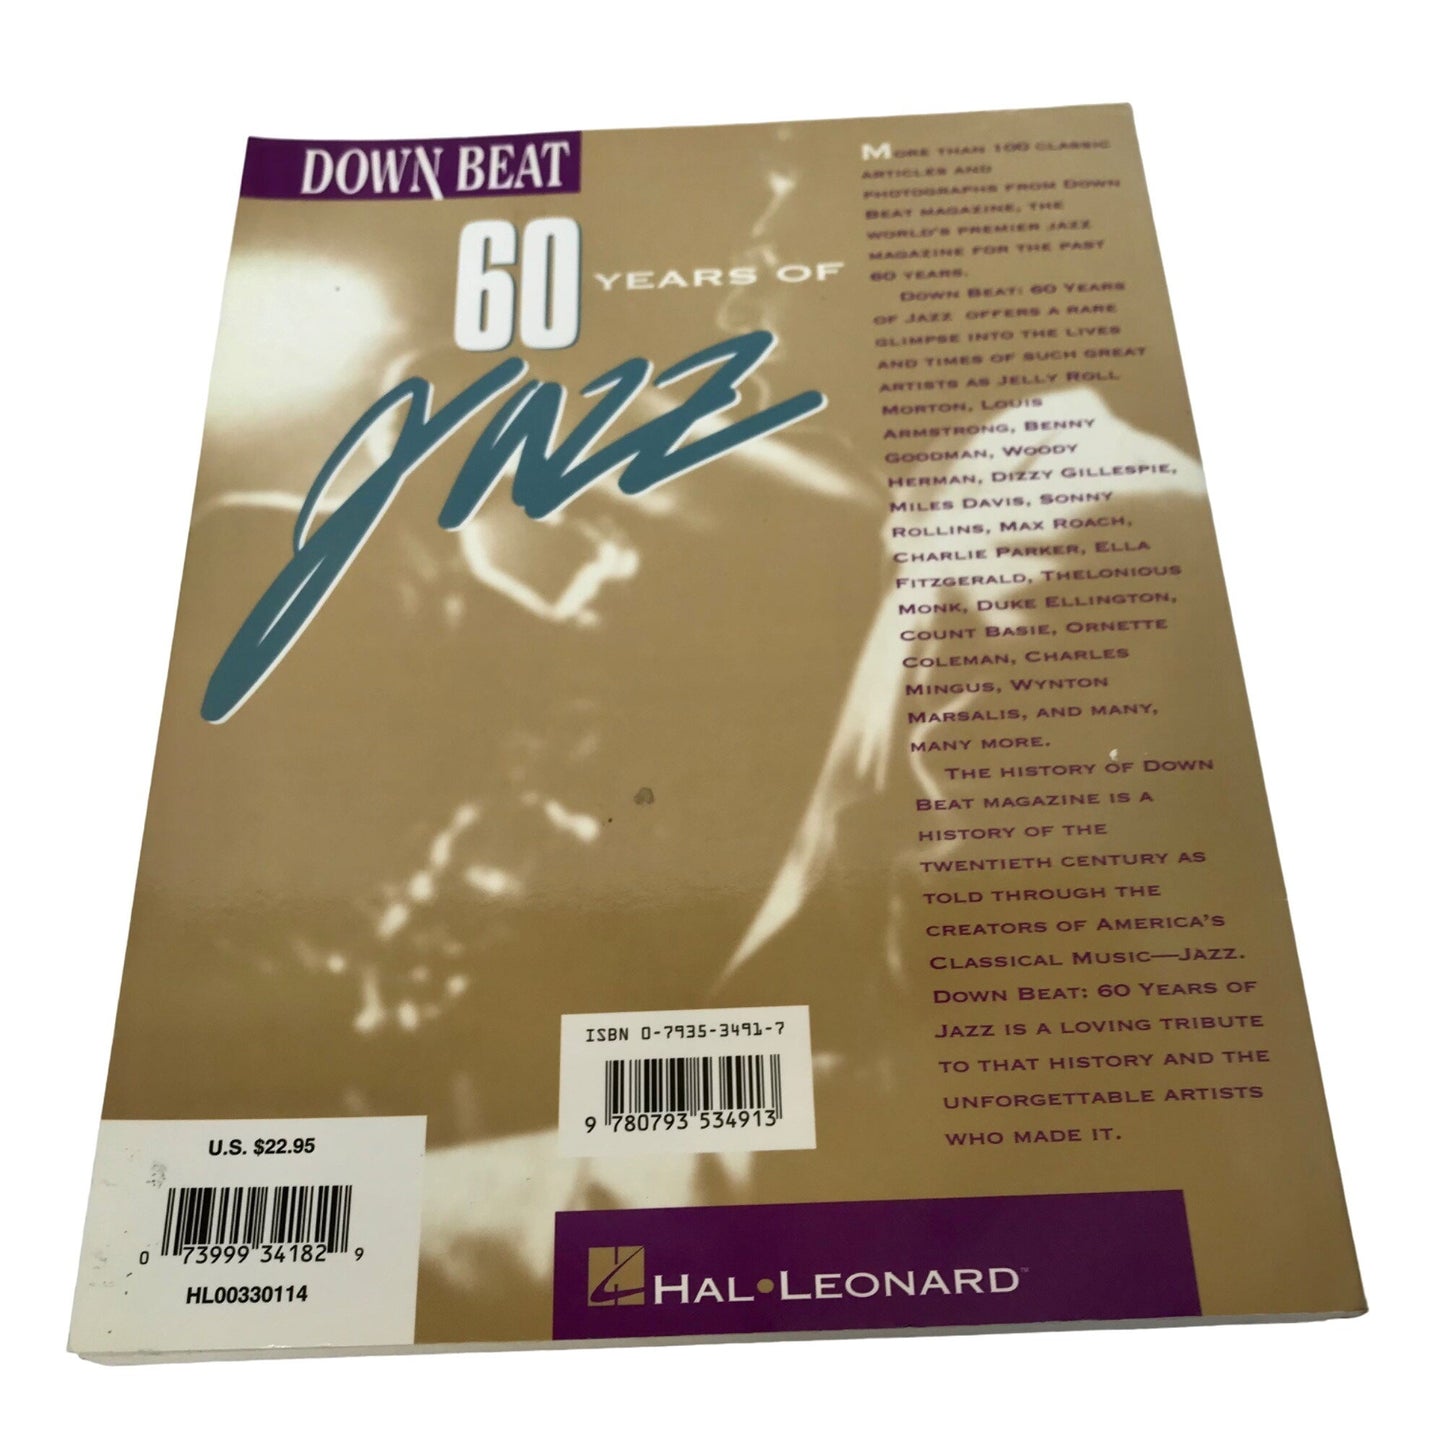 Down Beat 60 Years of Jazz Book by Hal Leonard